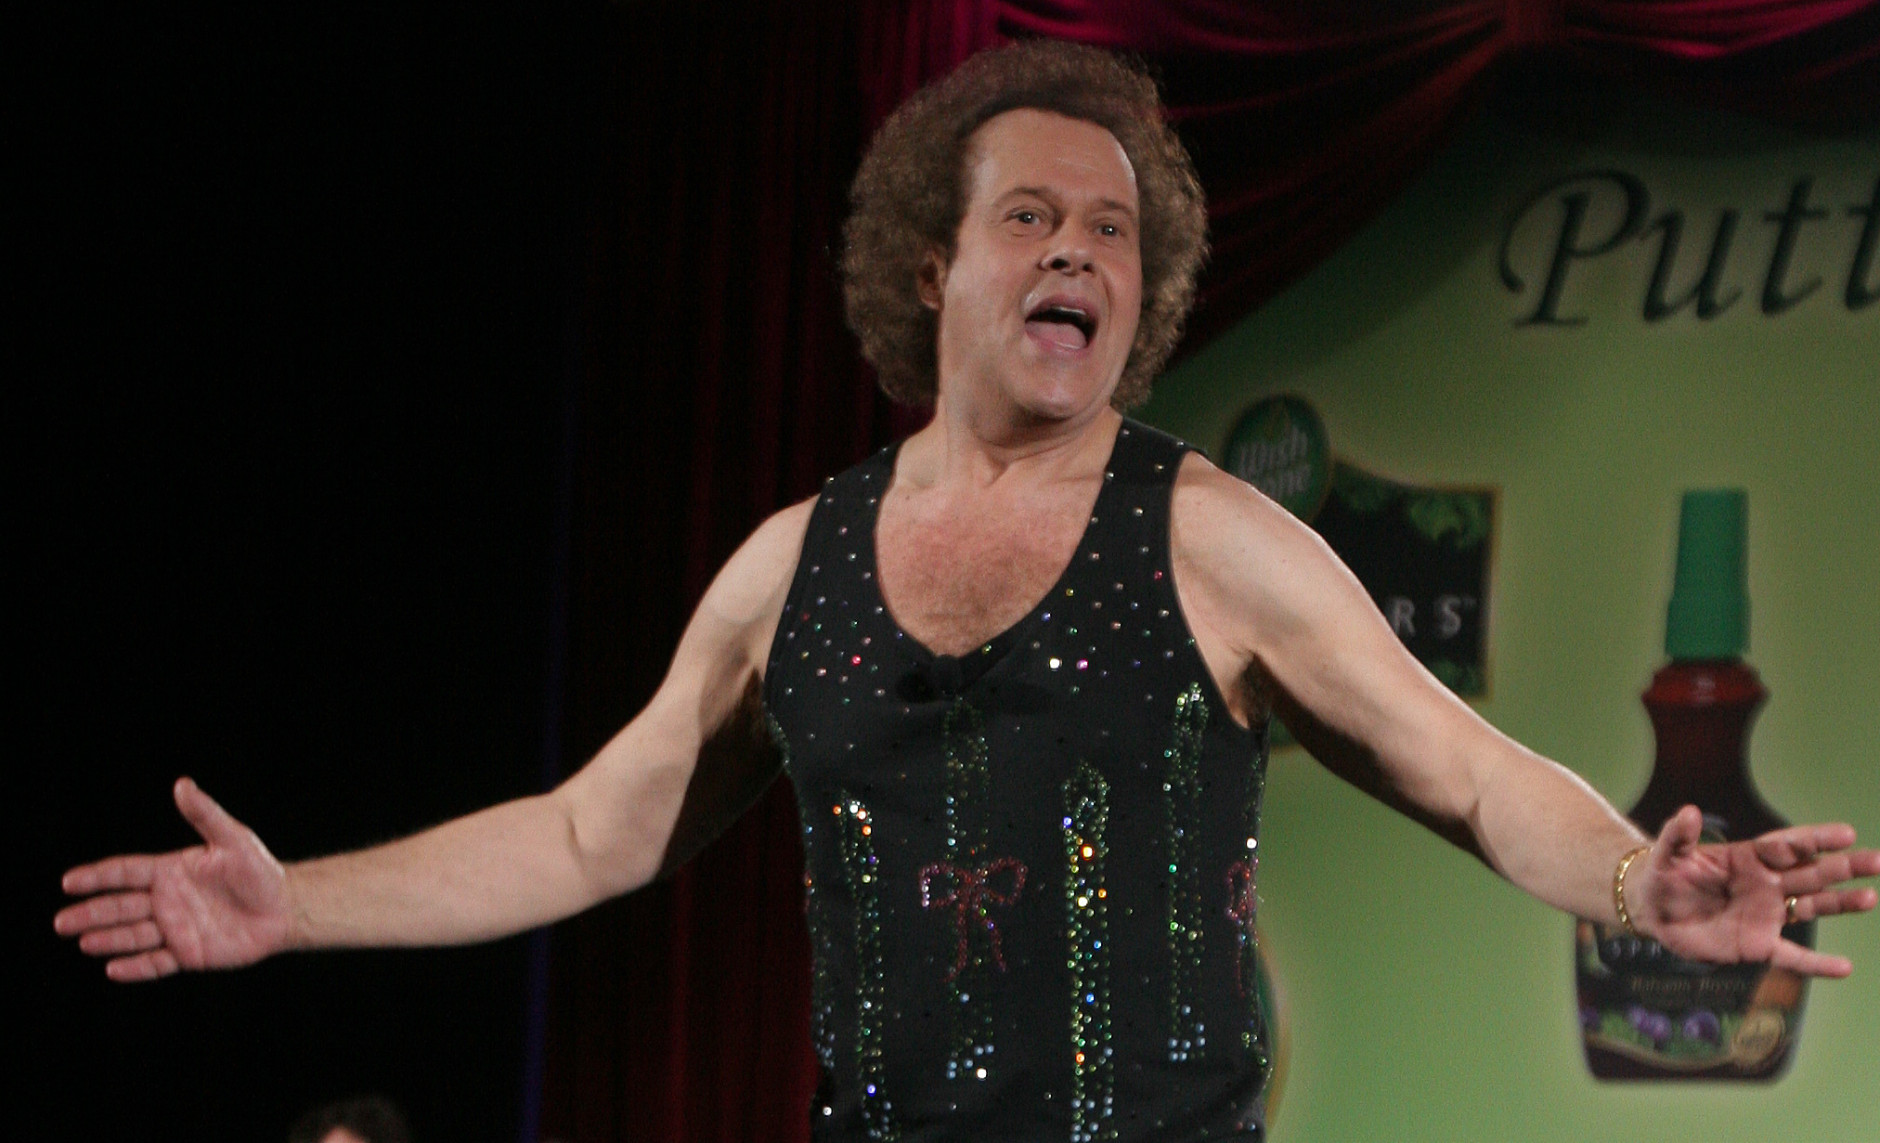 FILE - In this June 2, 2006, file photo, Richard Simmons speaks to the audience before the start of a summer salad fashion show at Grand Central Terminal in New York. Simmons told USA Today on June 5, 2016, that he was "feeling great" after being hospitalized for dehydration. (AP Photo/Tina Fineberg, File)